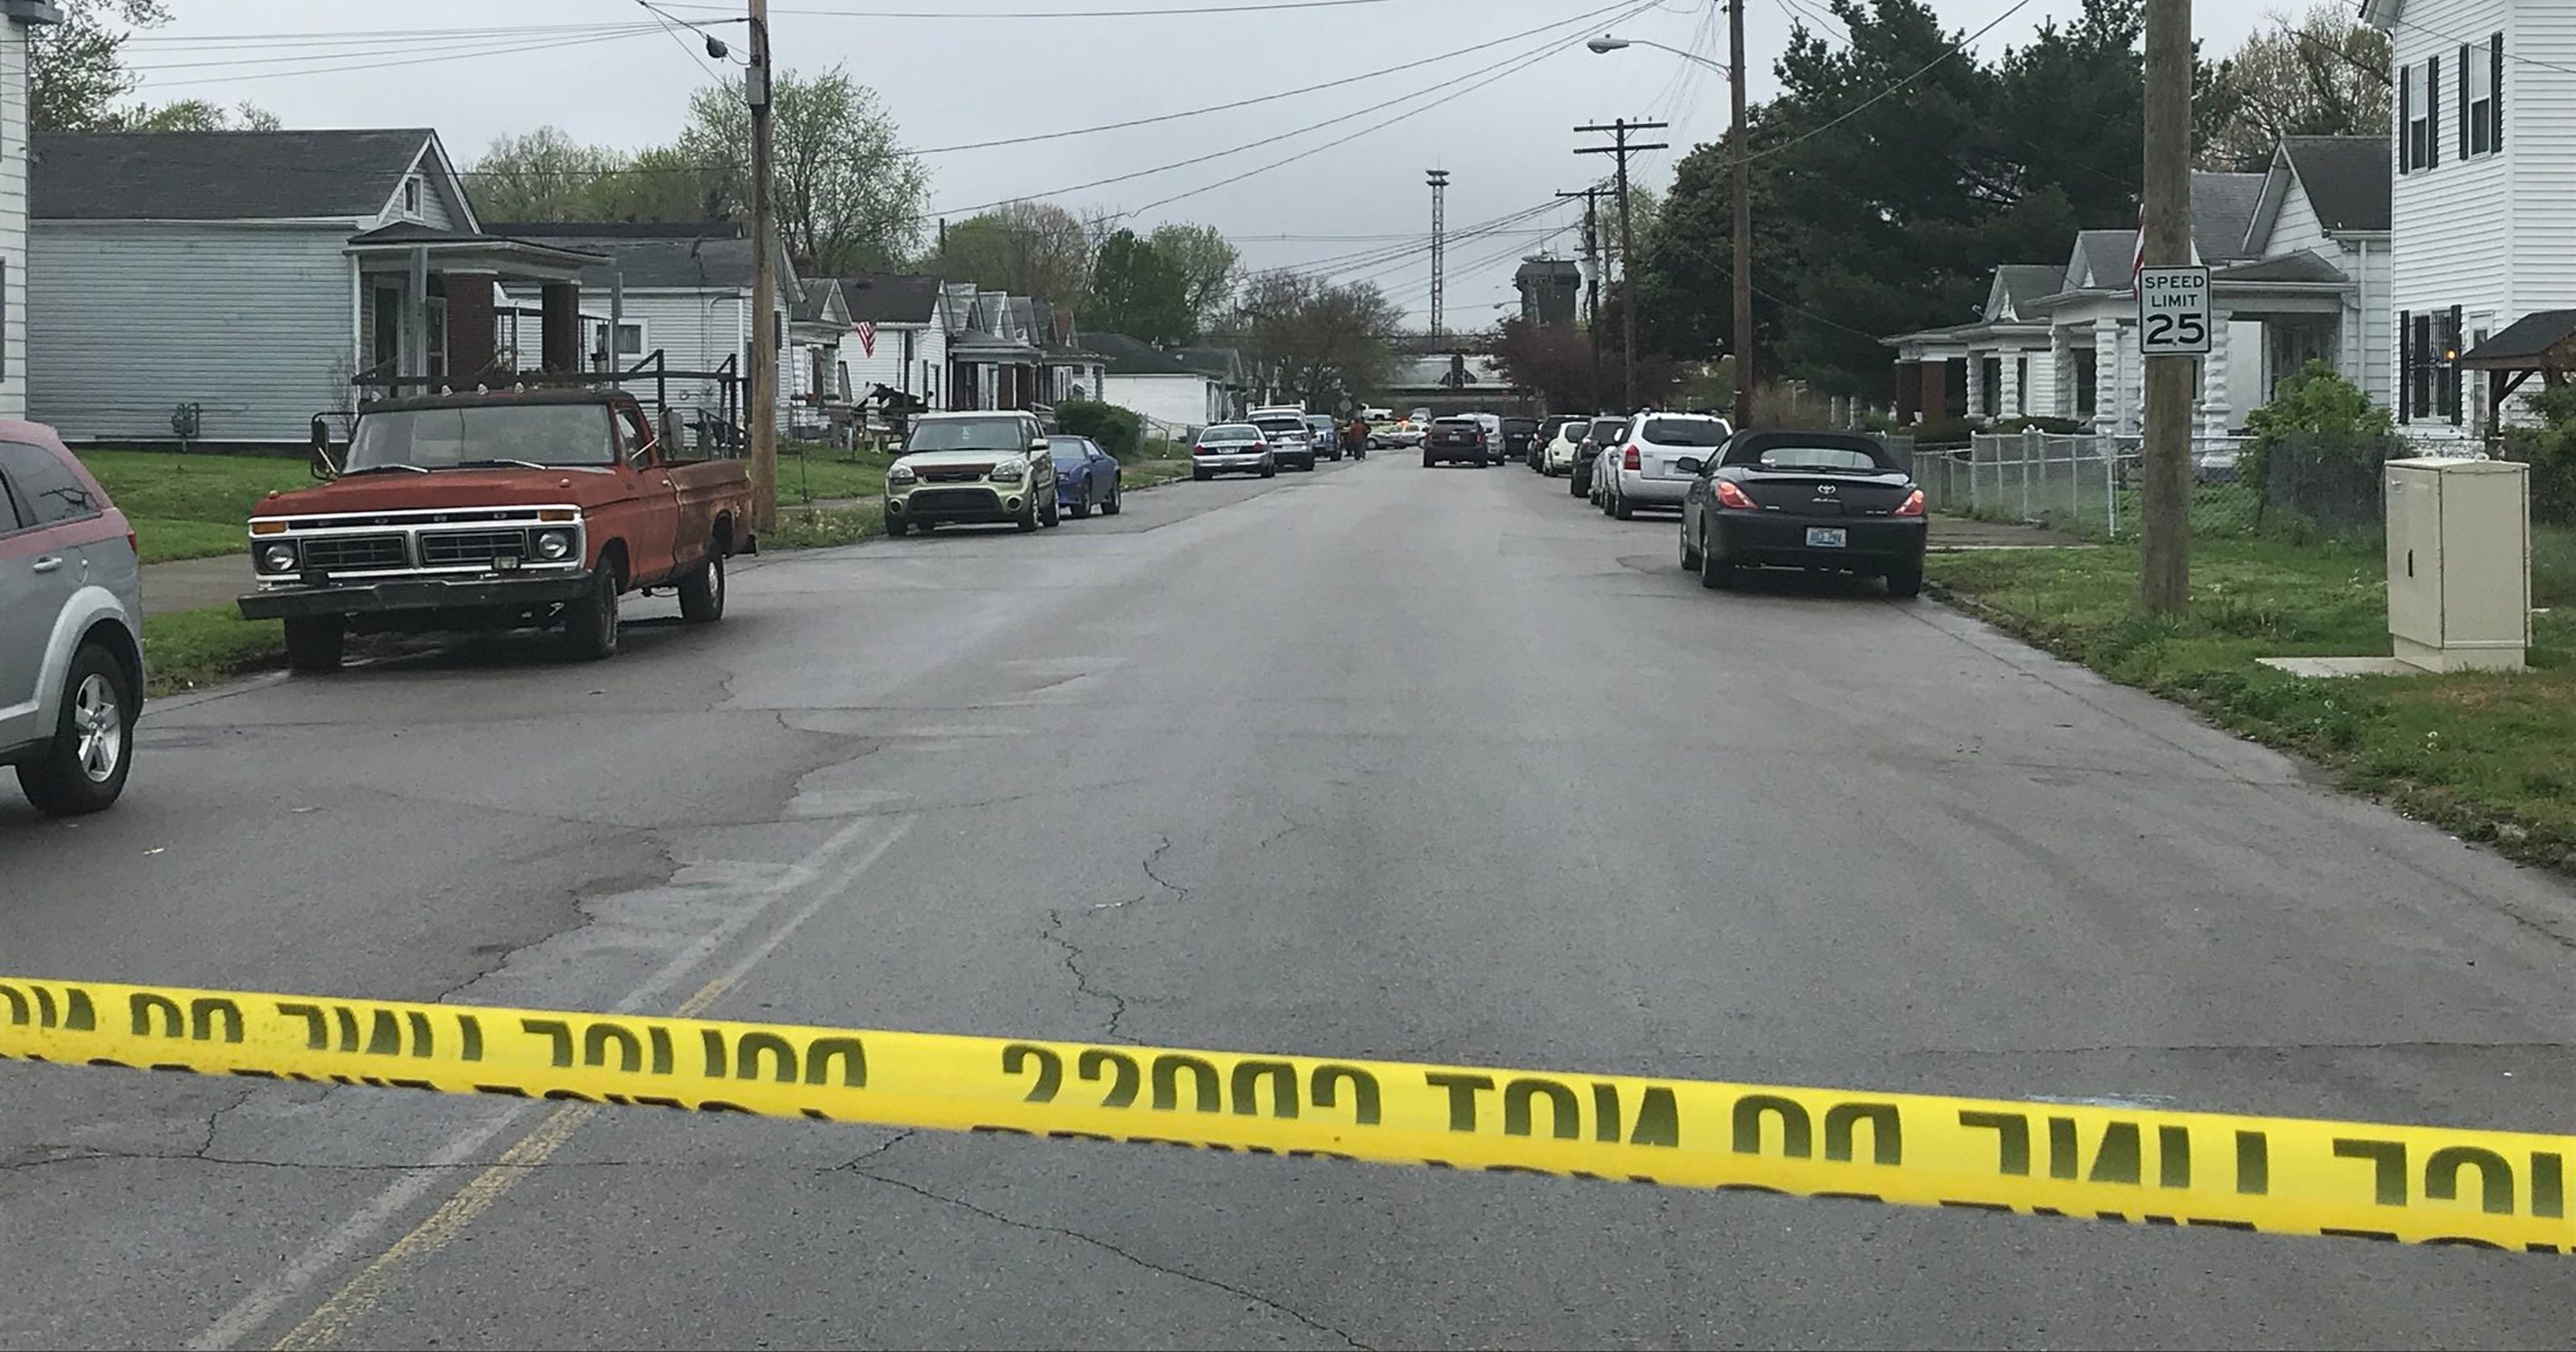 Coroner IDs Louisville man shot and killed by police on Tuesday